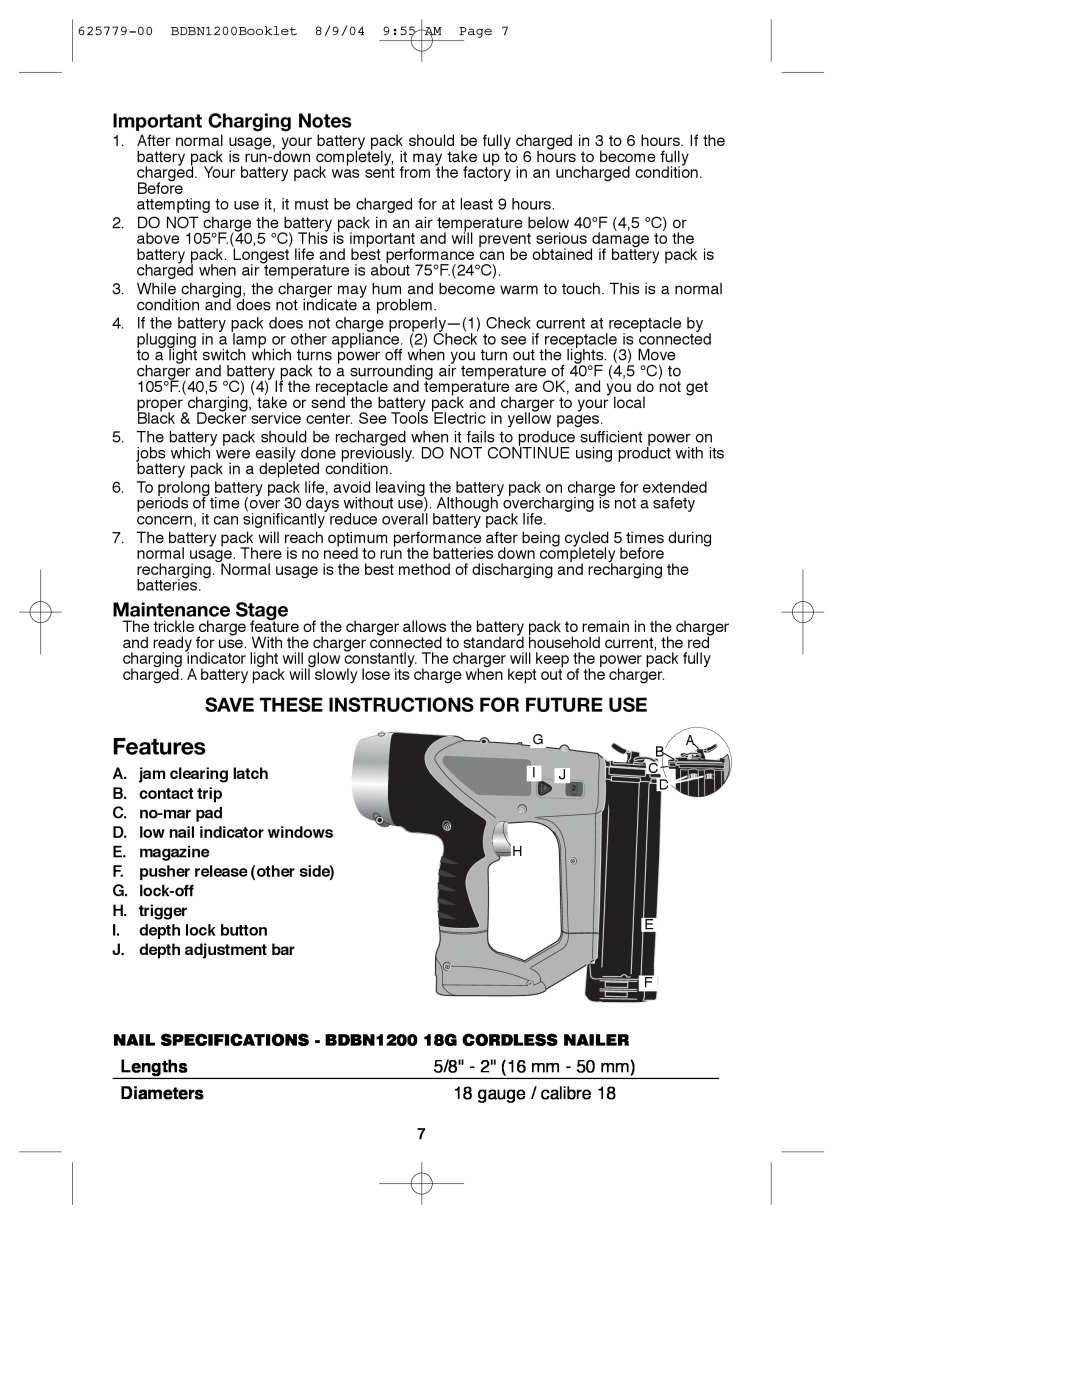 Black & Decker BDBN1200 Features, Important Charging Notes, Maintenance Stage, Save These Instructions For Future Use 